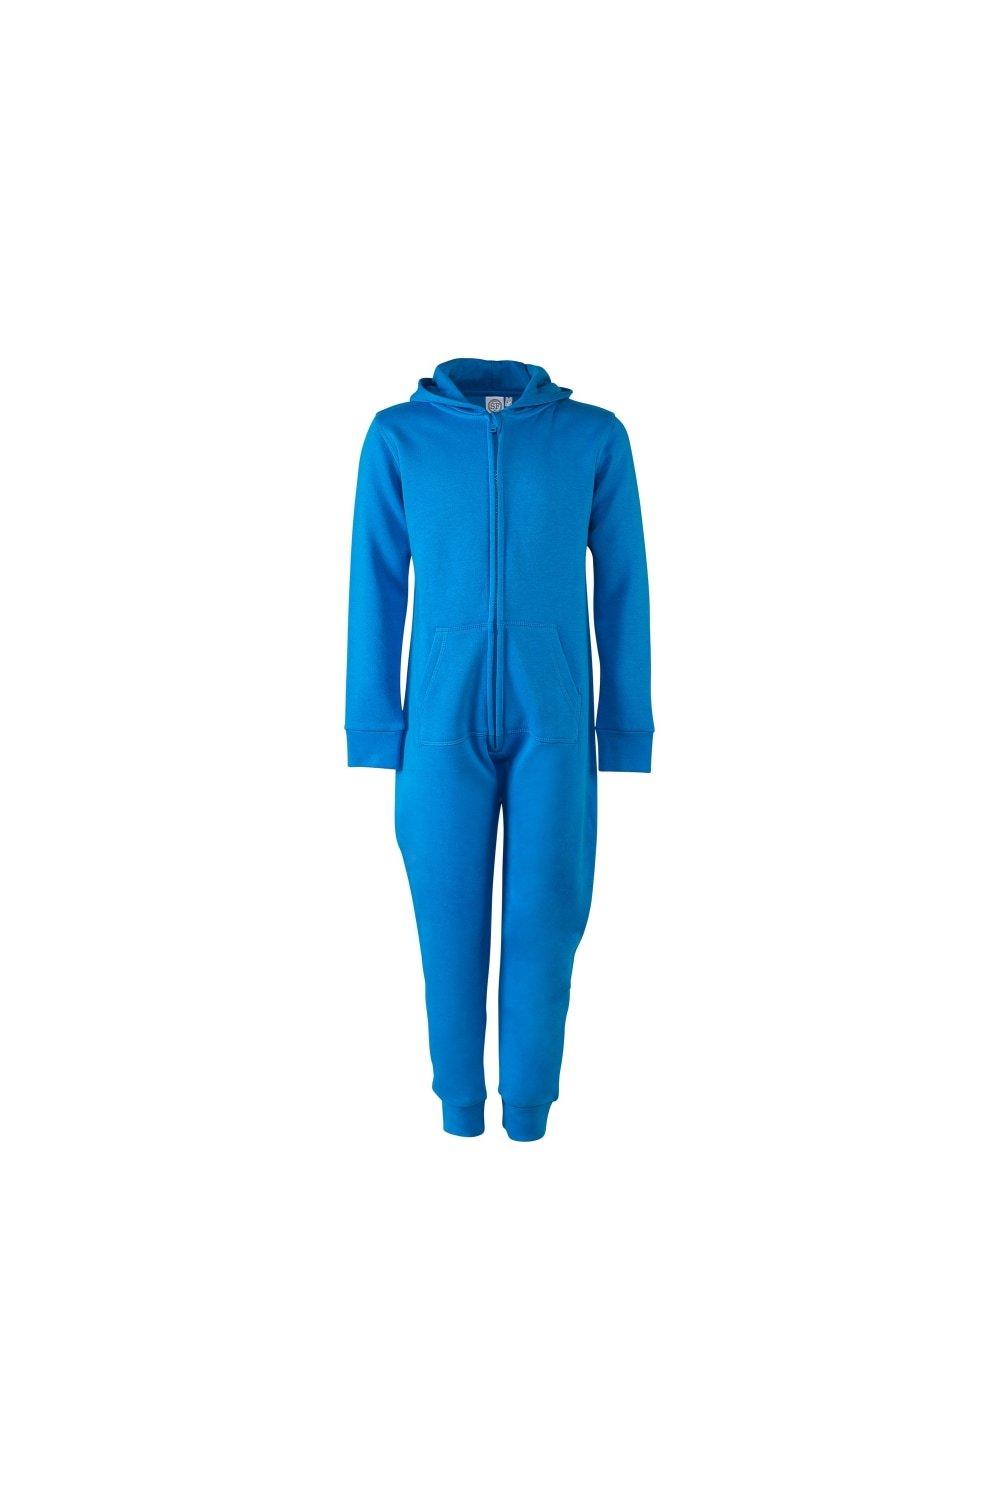 Skinnifit Minni Zip Up All-In-One